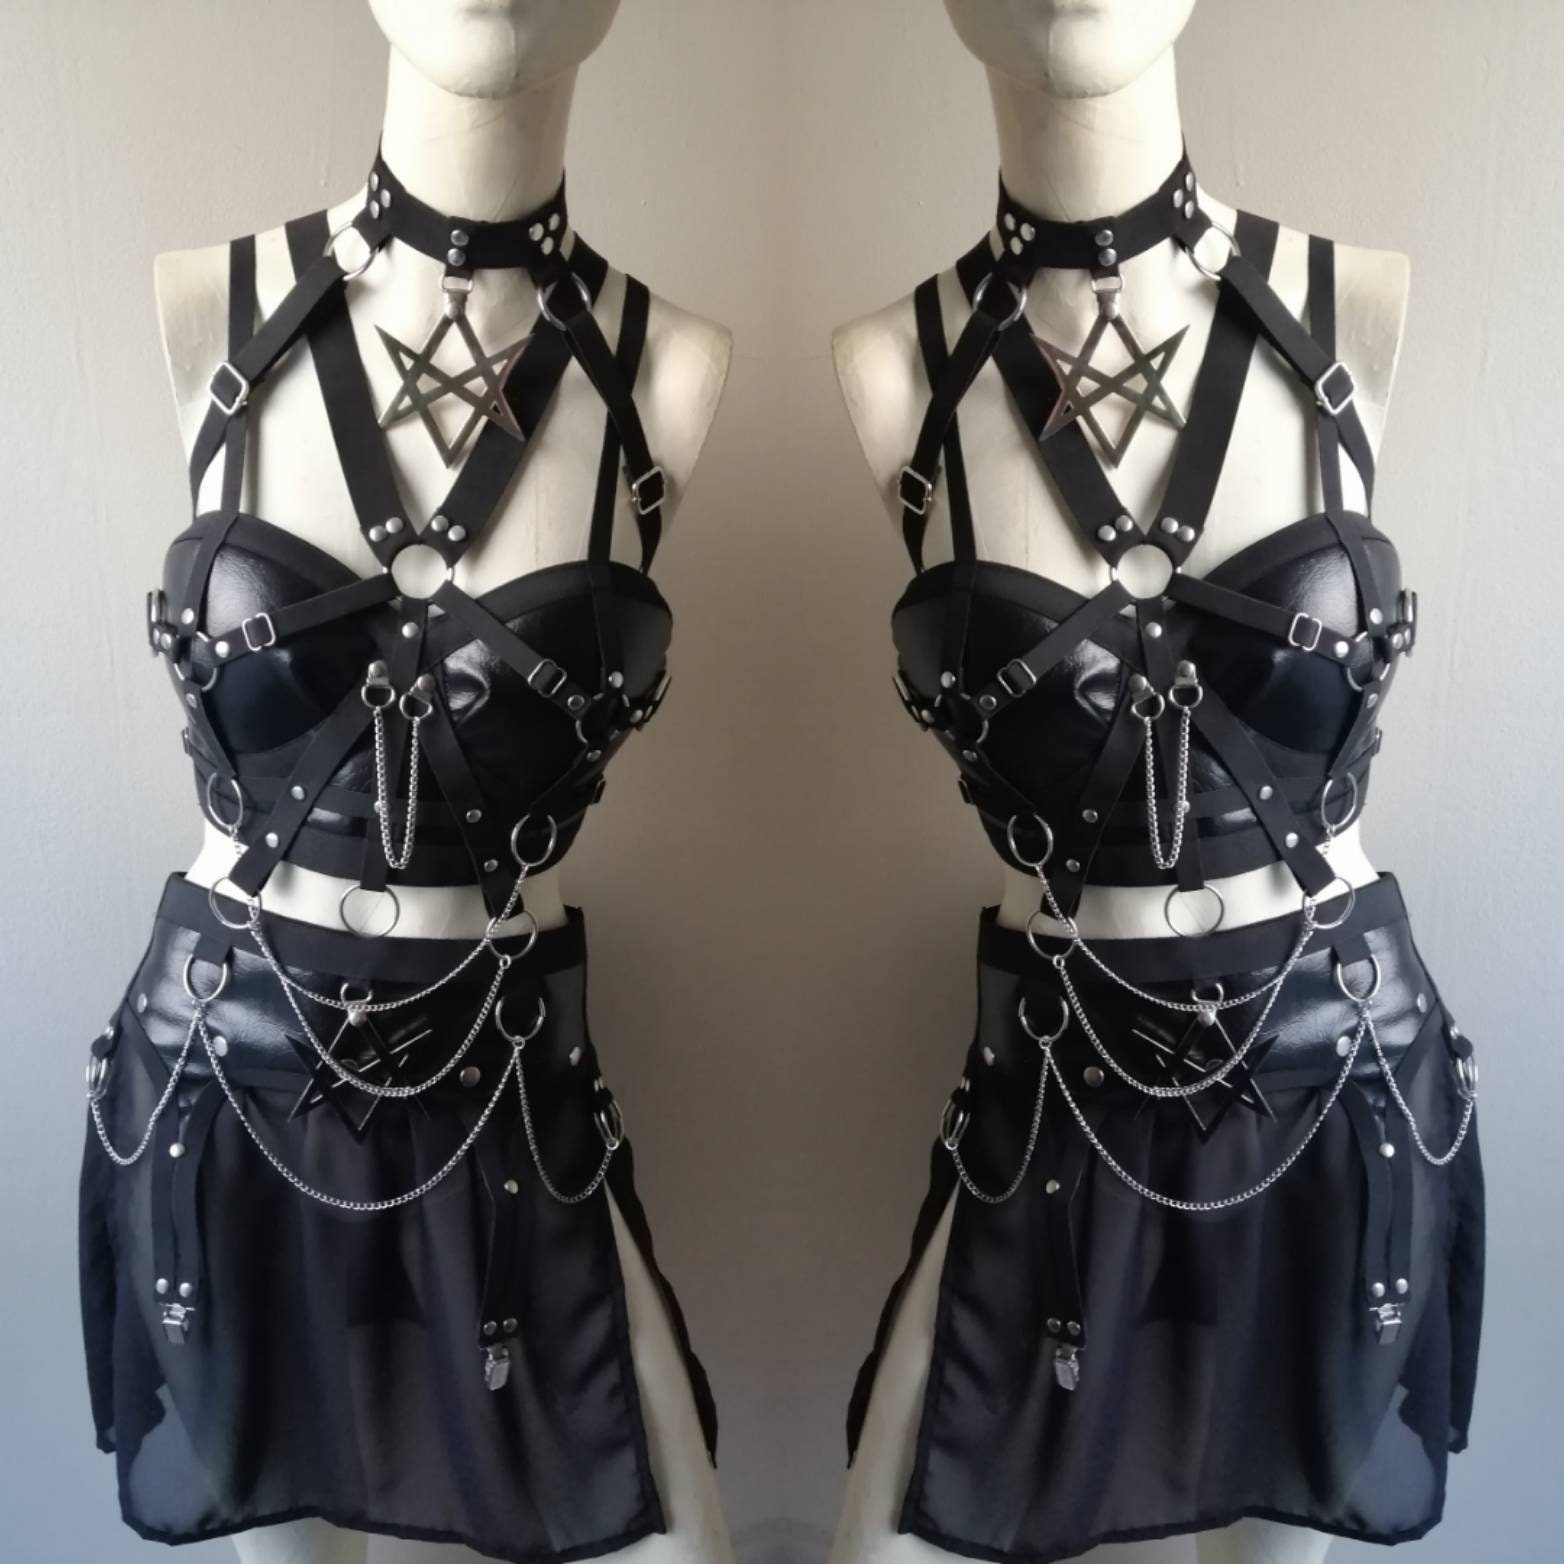 Faux leather harness top (thelema) photo